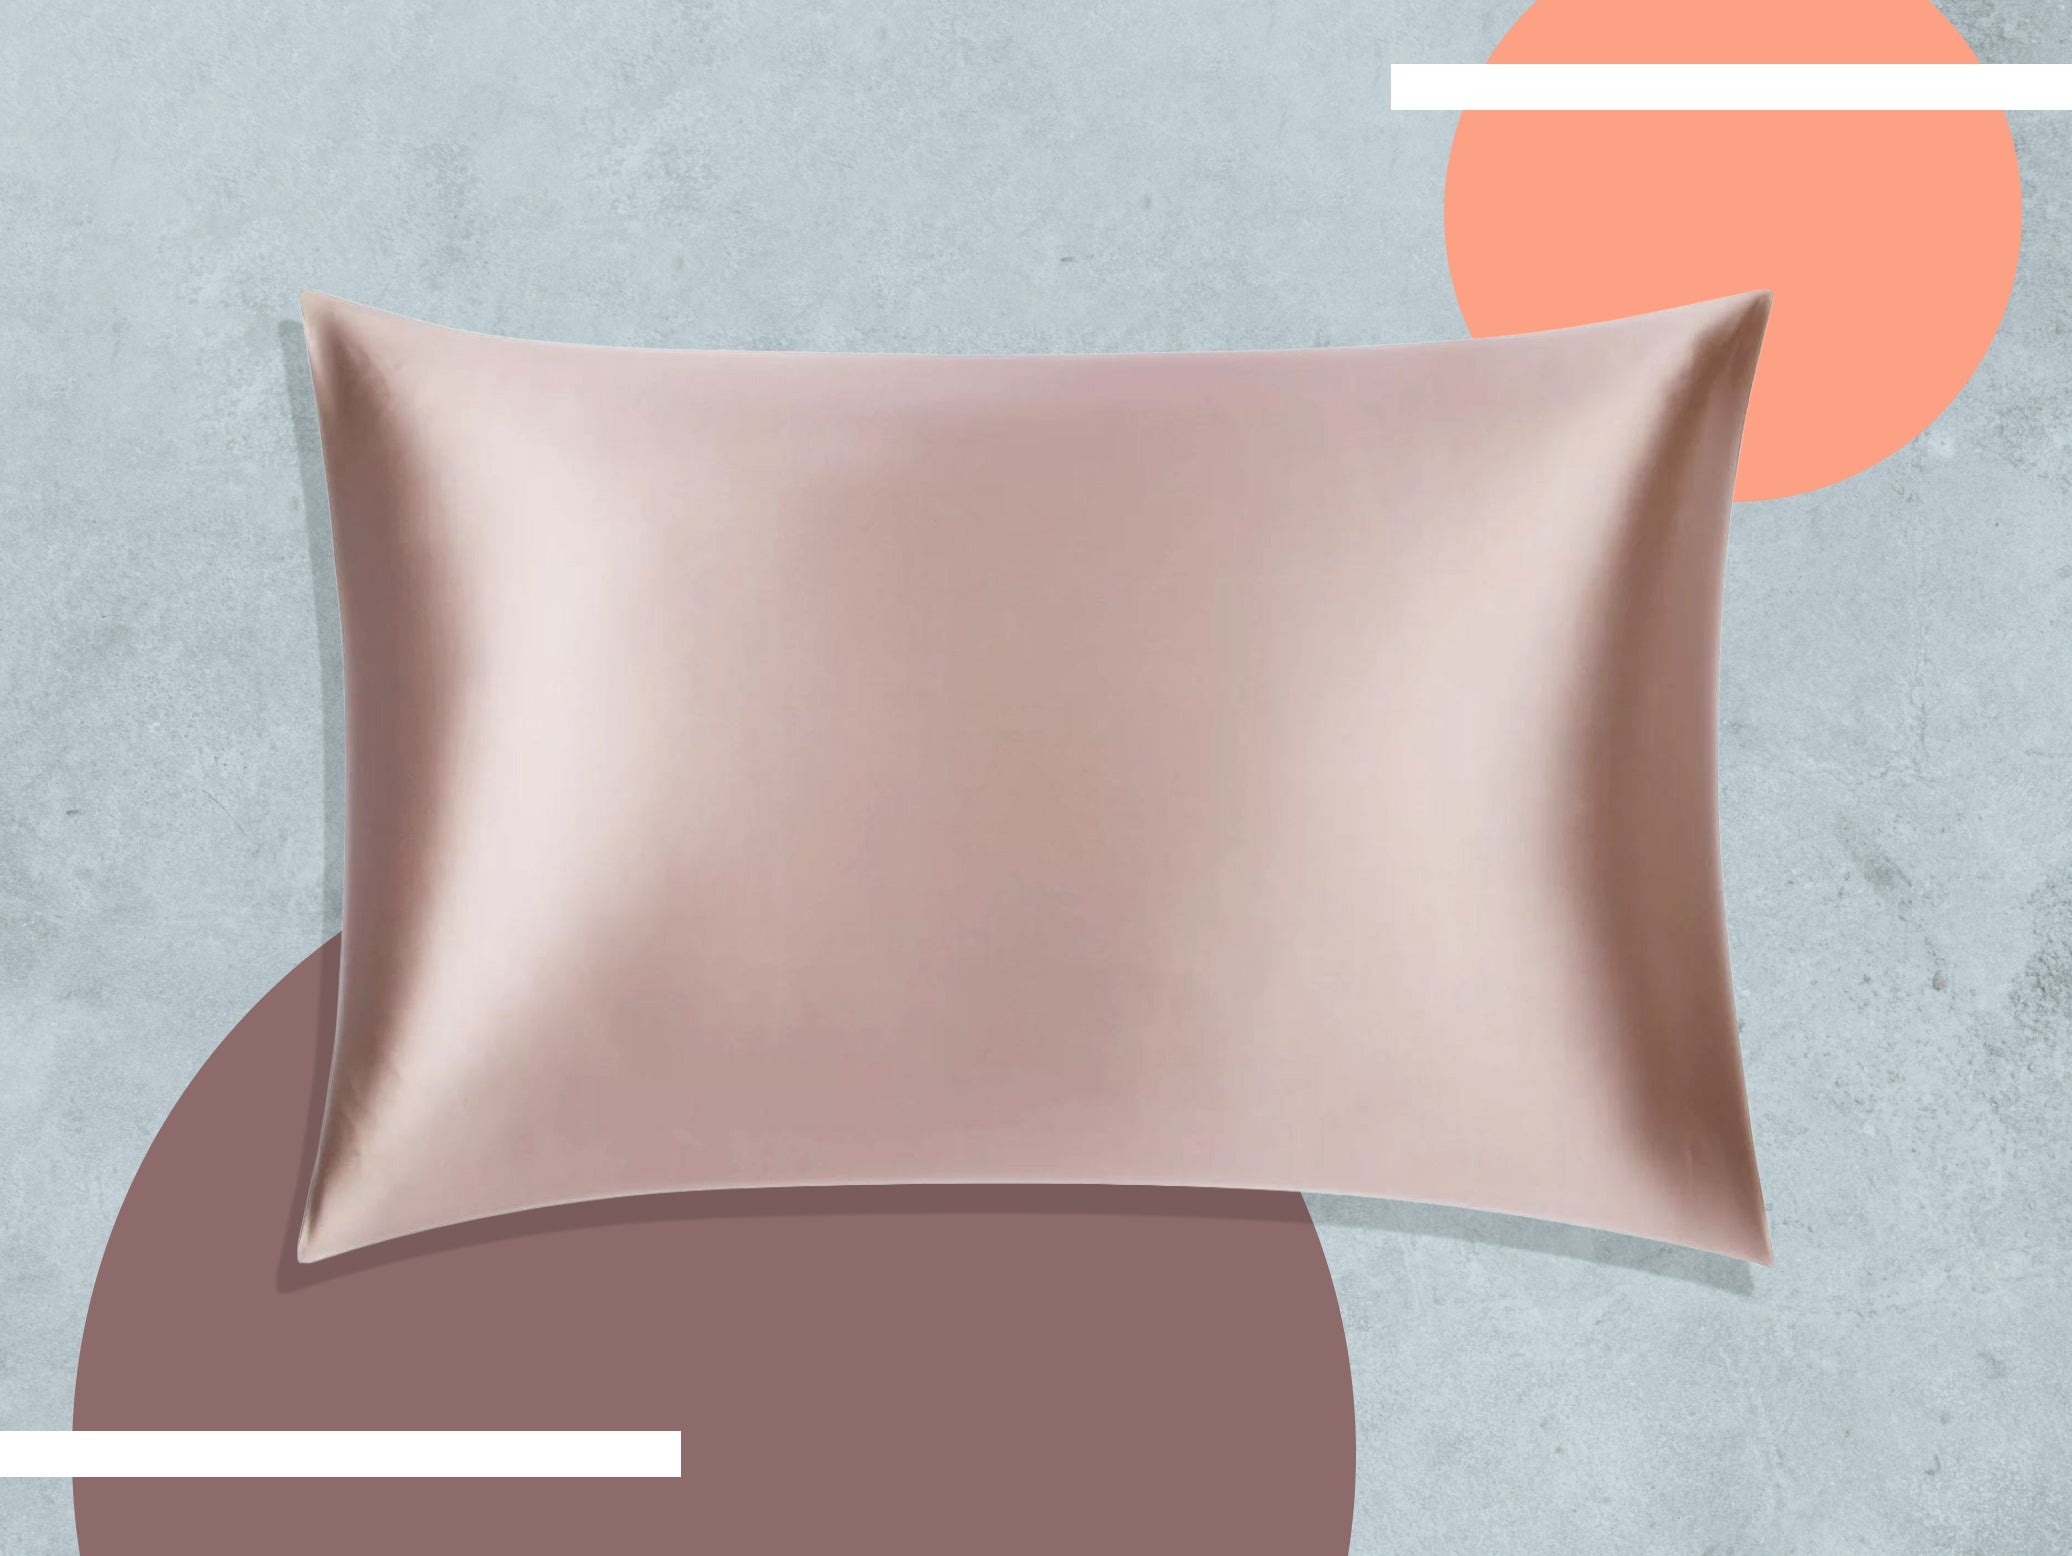 This pillow comes in a wide range of colours to match any bedroom